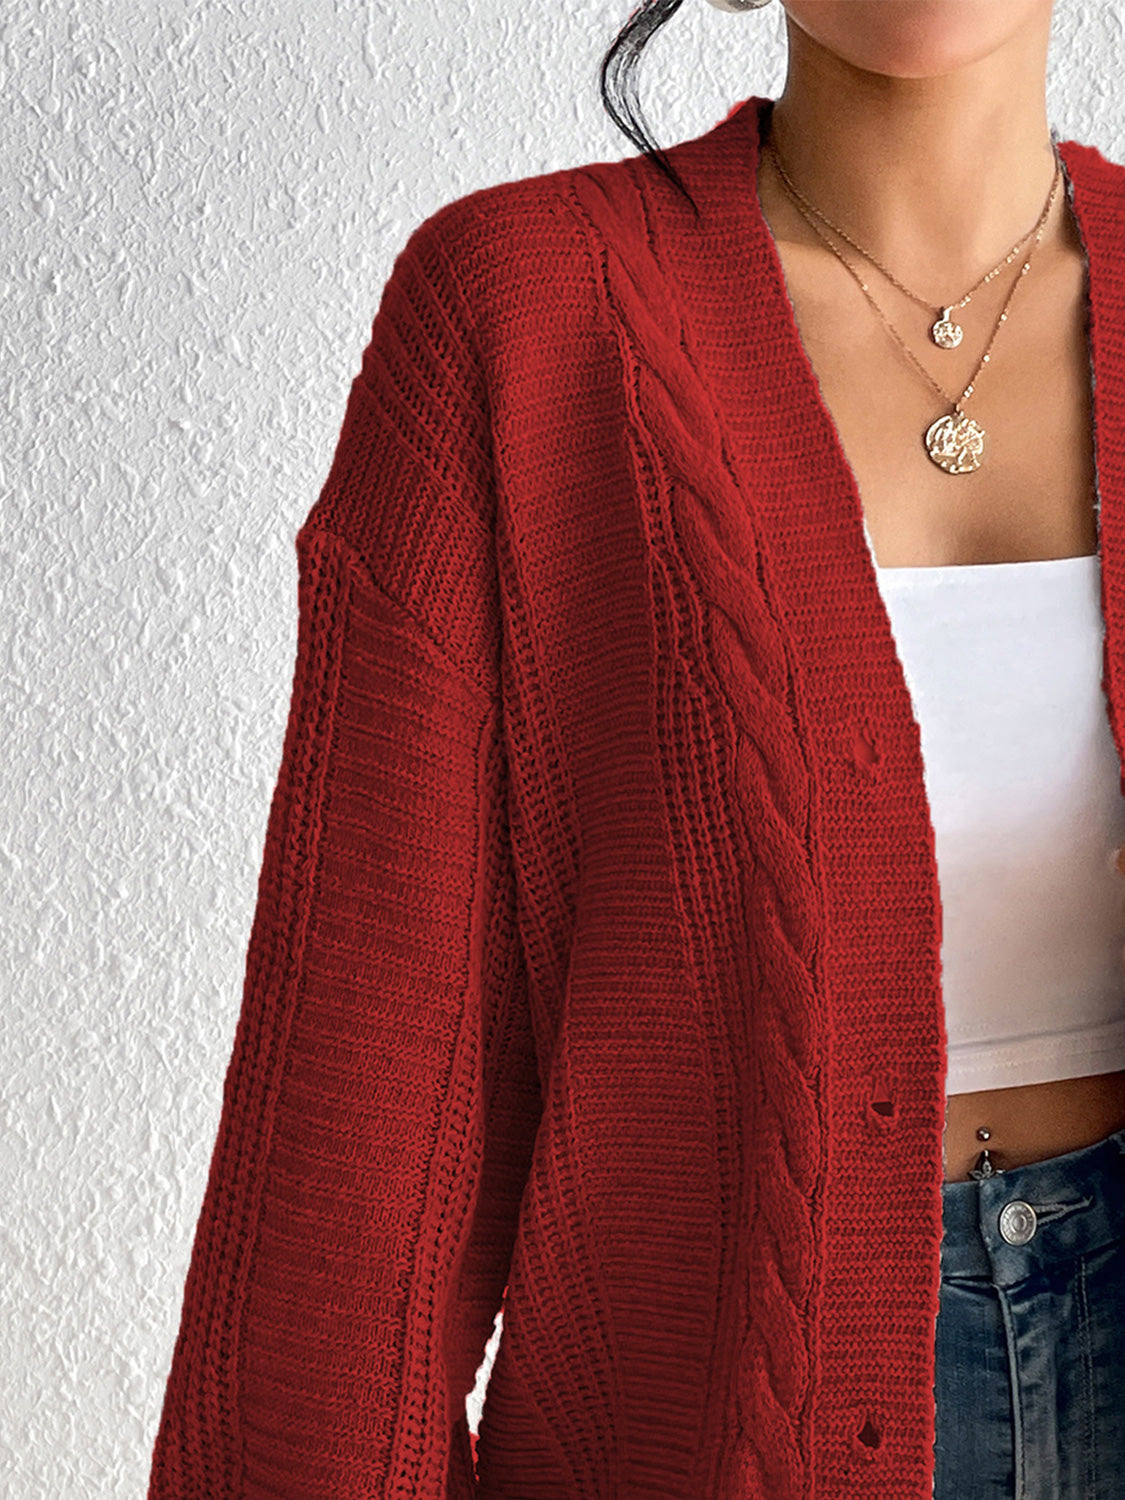 Cable-Knit Button Down Cardigan - Women’s Clothing & Accessories - Shirts & Tops - 11 - 2024